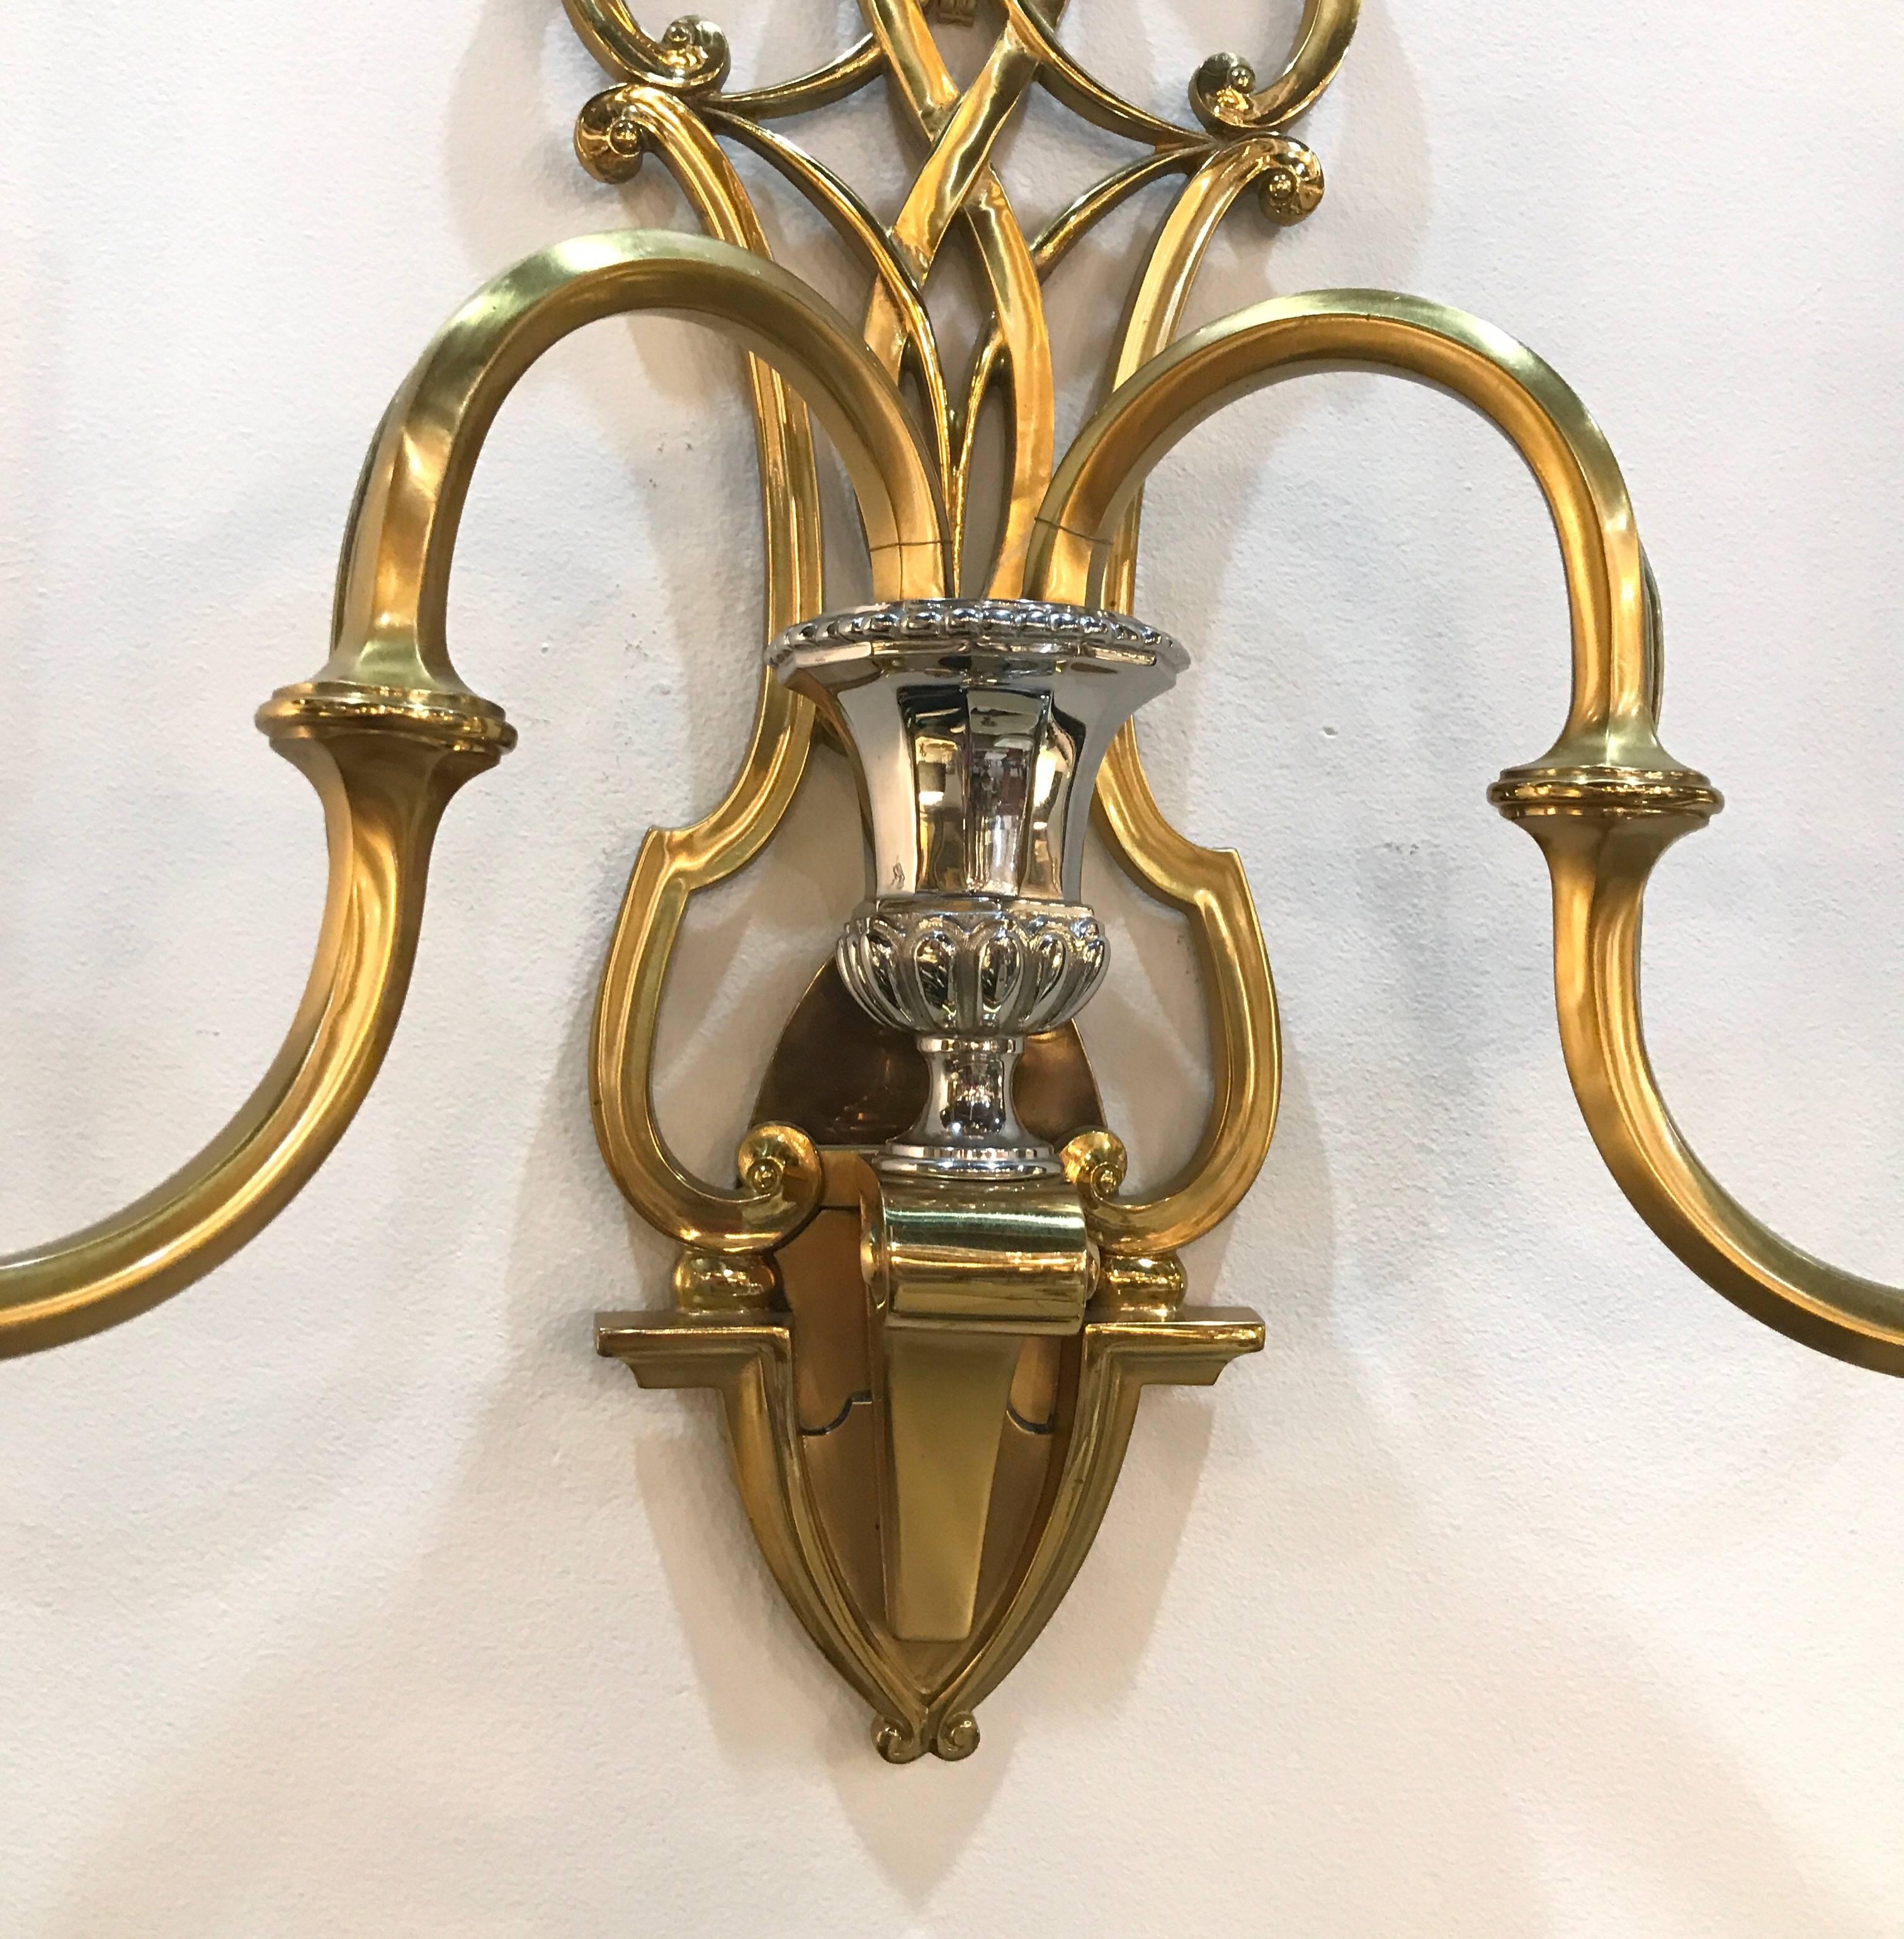 A graceful pair of polished brass French style sconces with nickel-plated accents. The plume tops with pretzel braid back shield with two electrified candles.